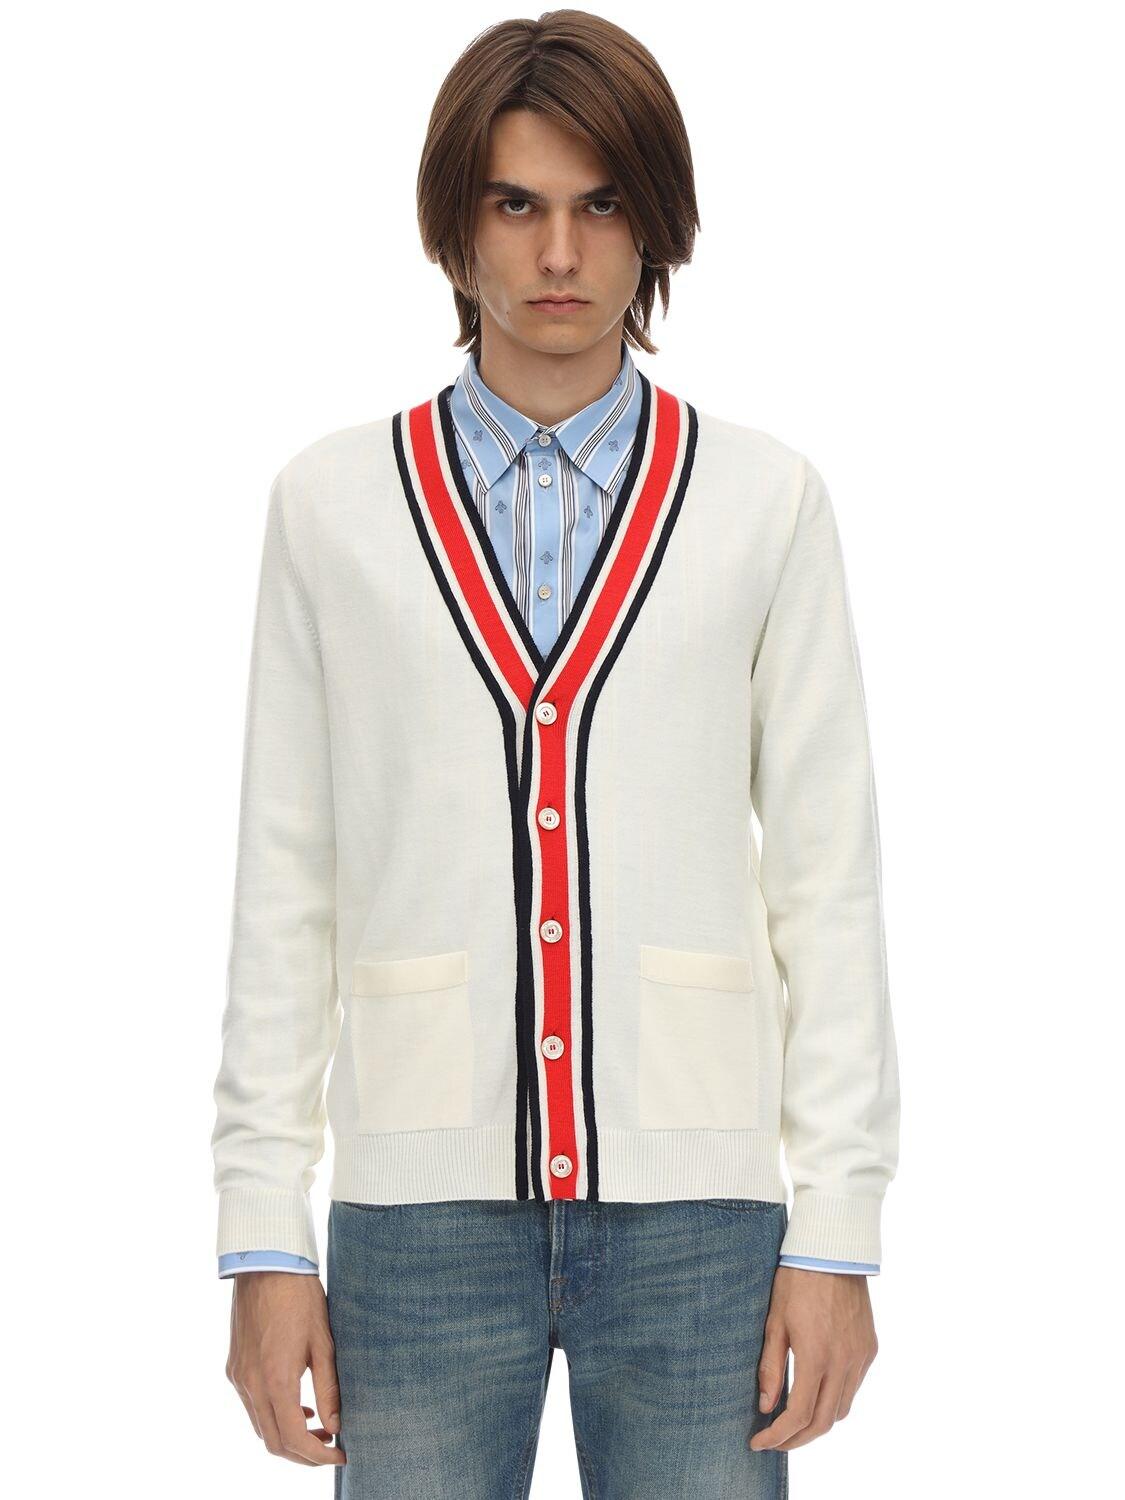 Gucci Web V-neck Wool Knit Cardigan in White for Men - Lyst